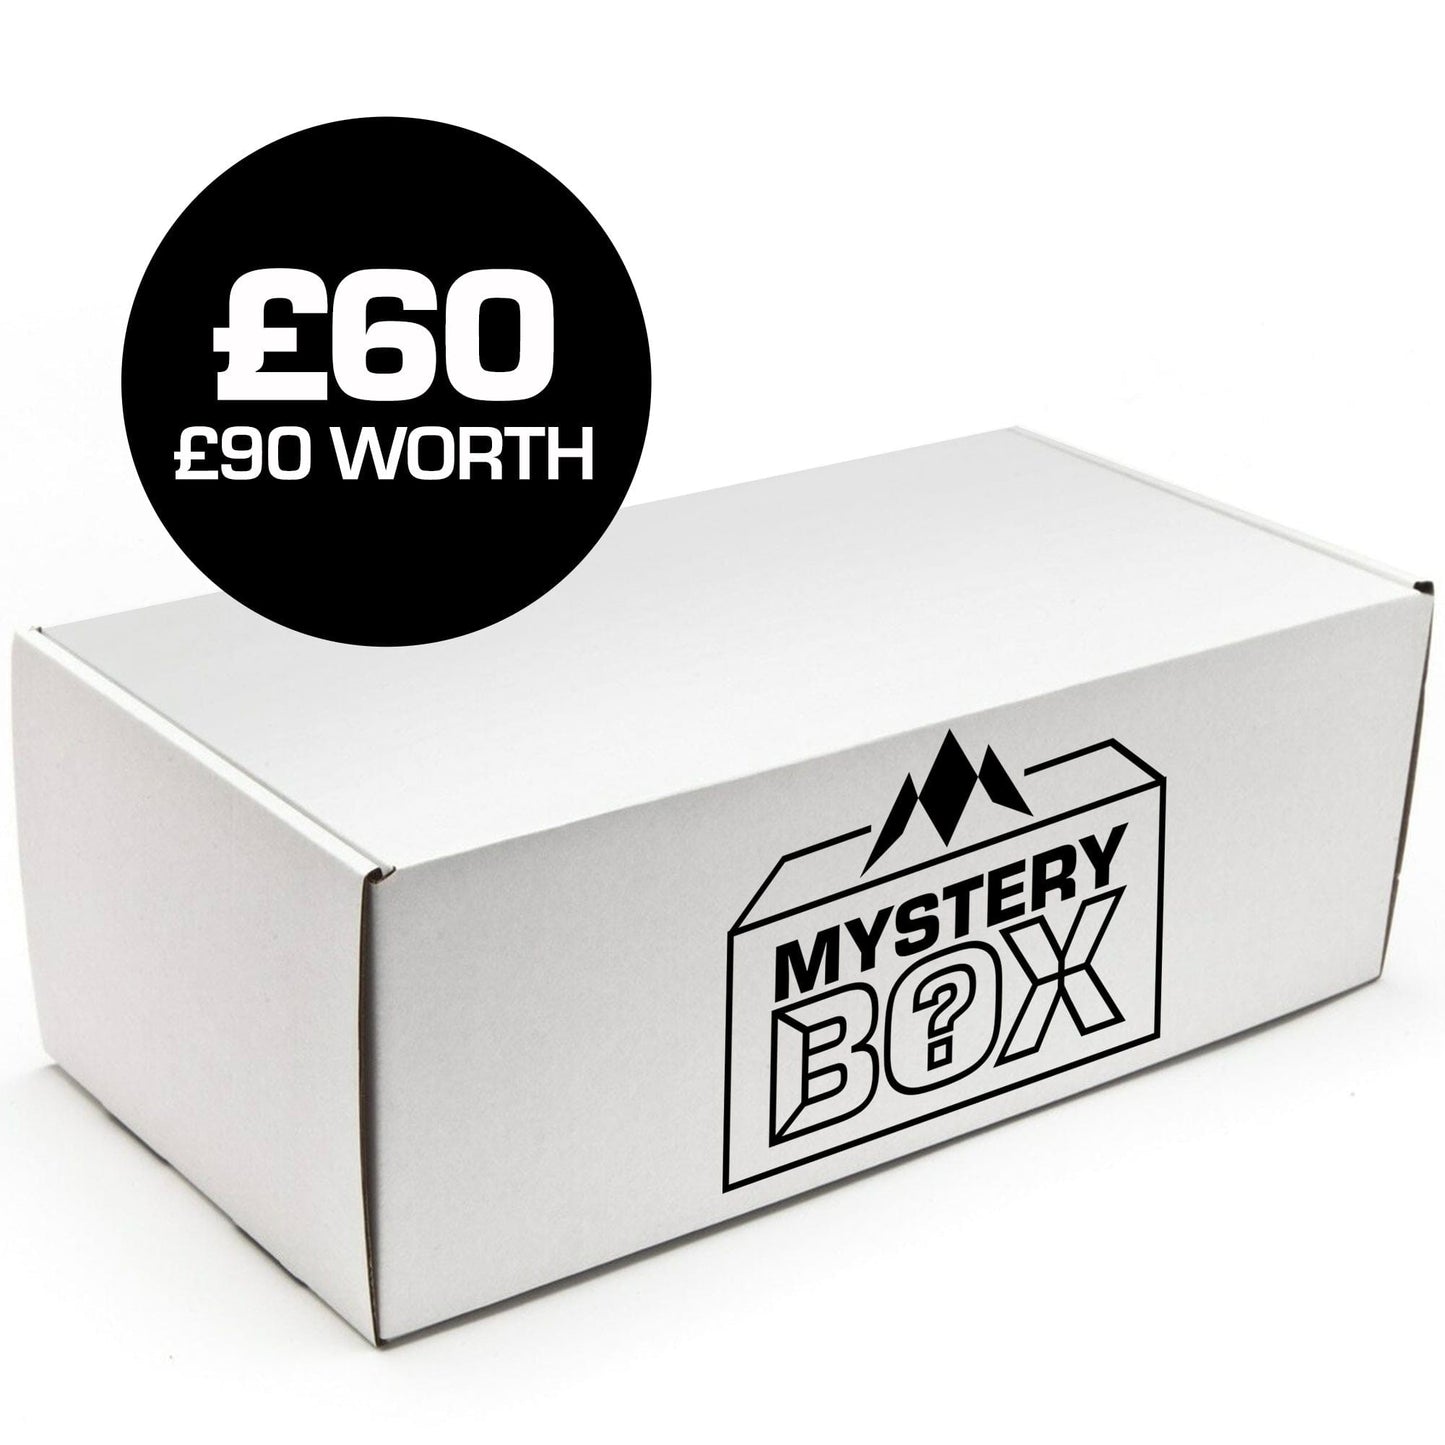 Mission Mystery Box - Soft Tip Darts & Accessories - Worth up to £90